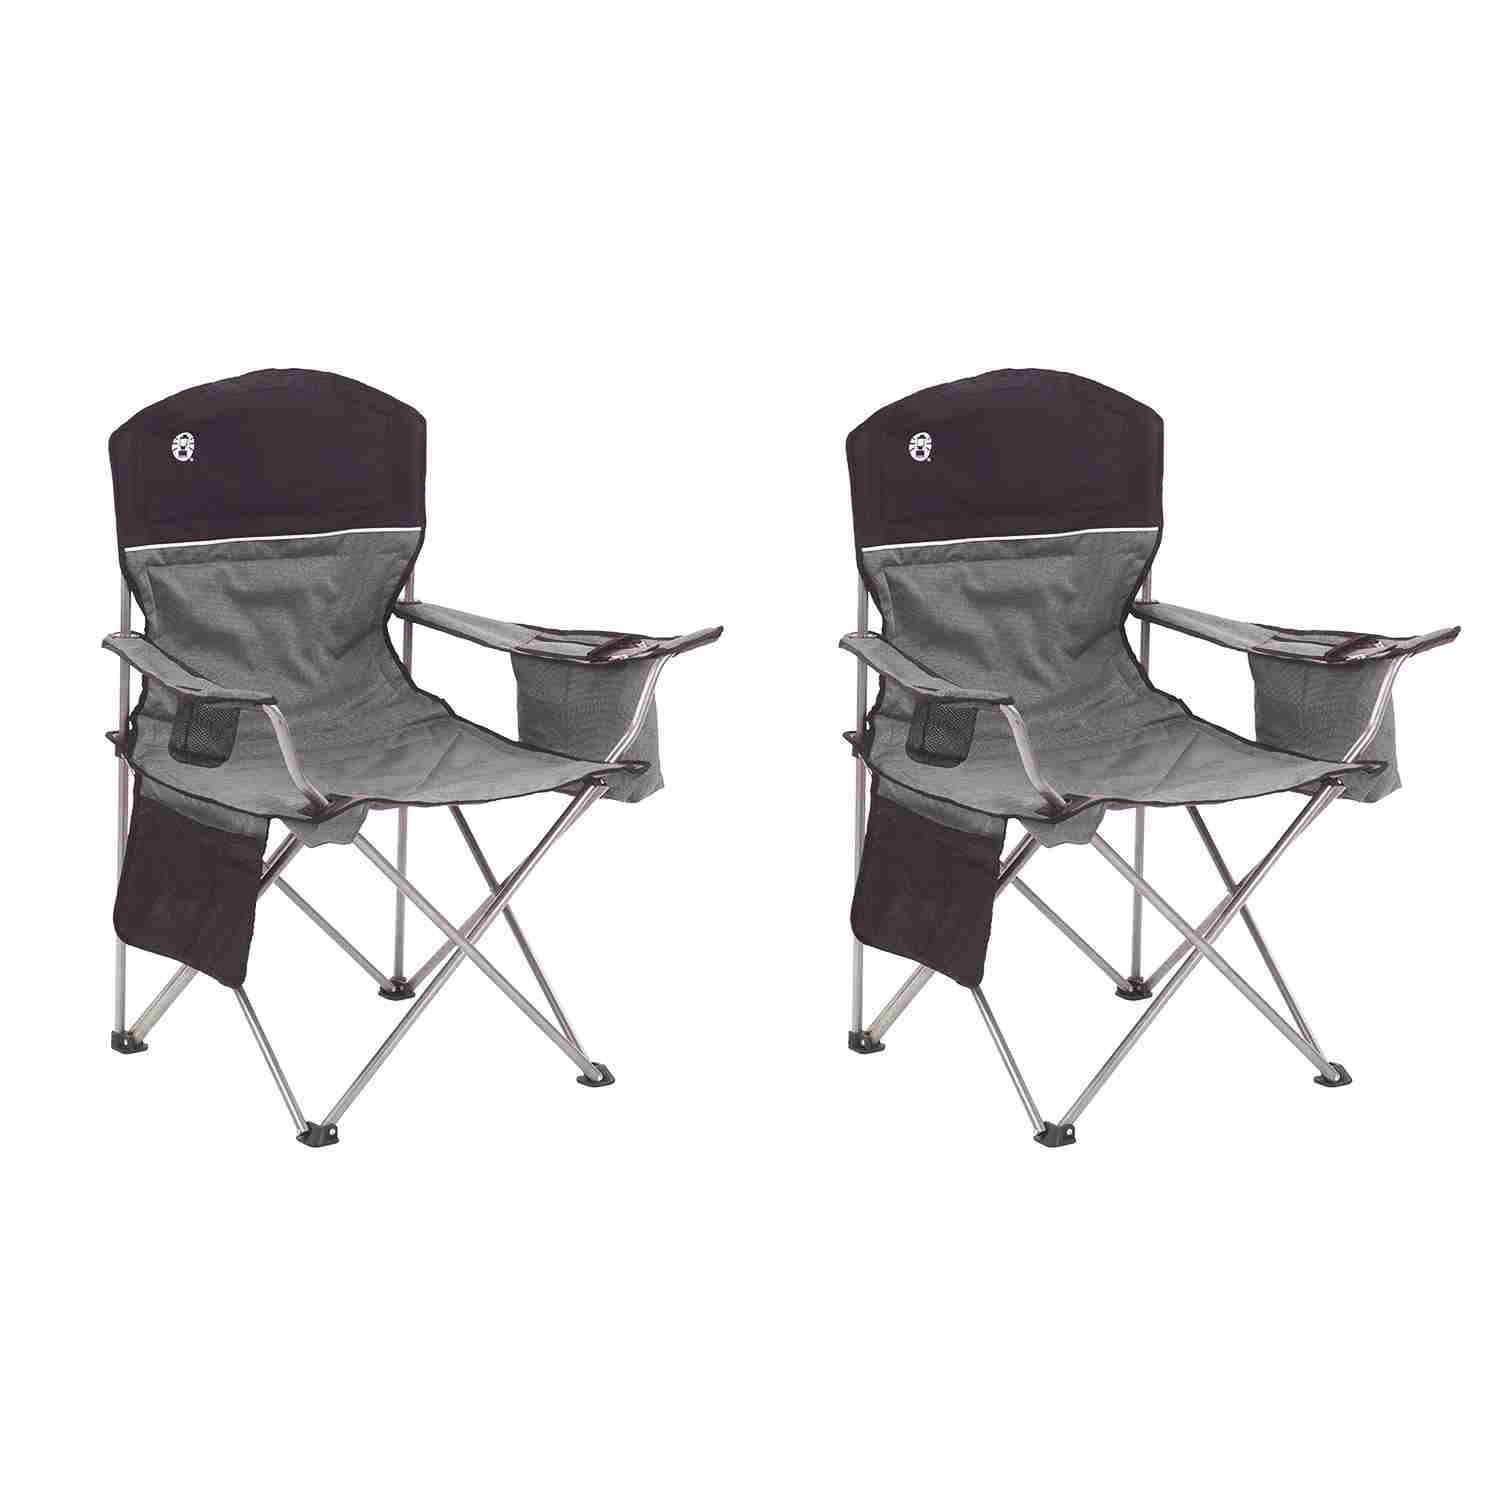 coleman-oversized-two-seater-camping-chair